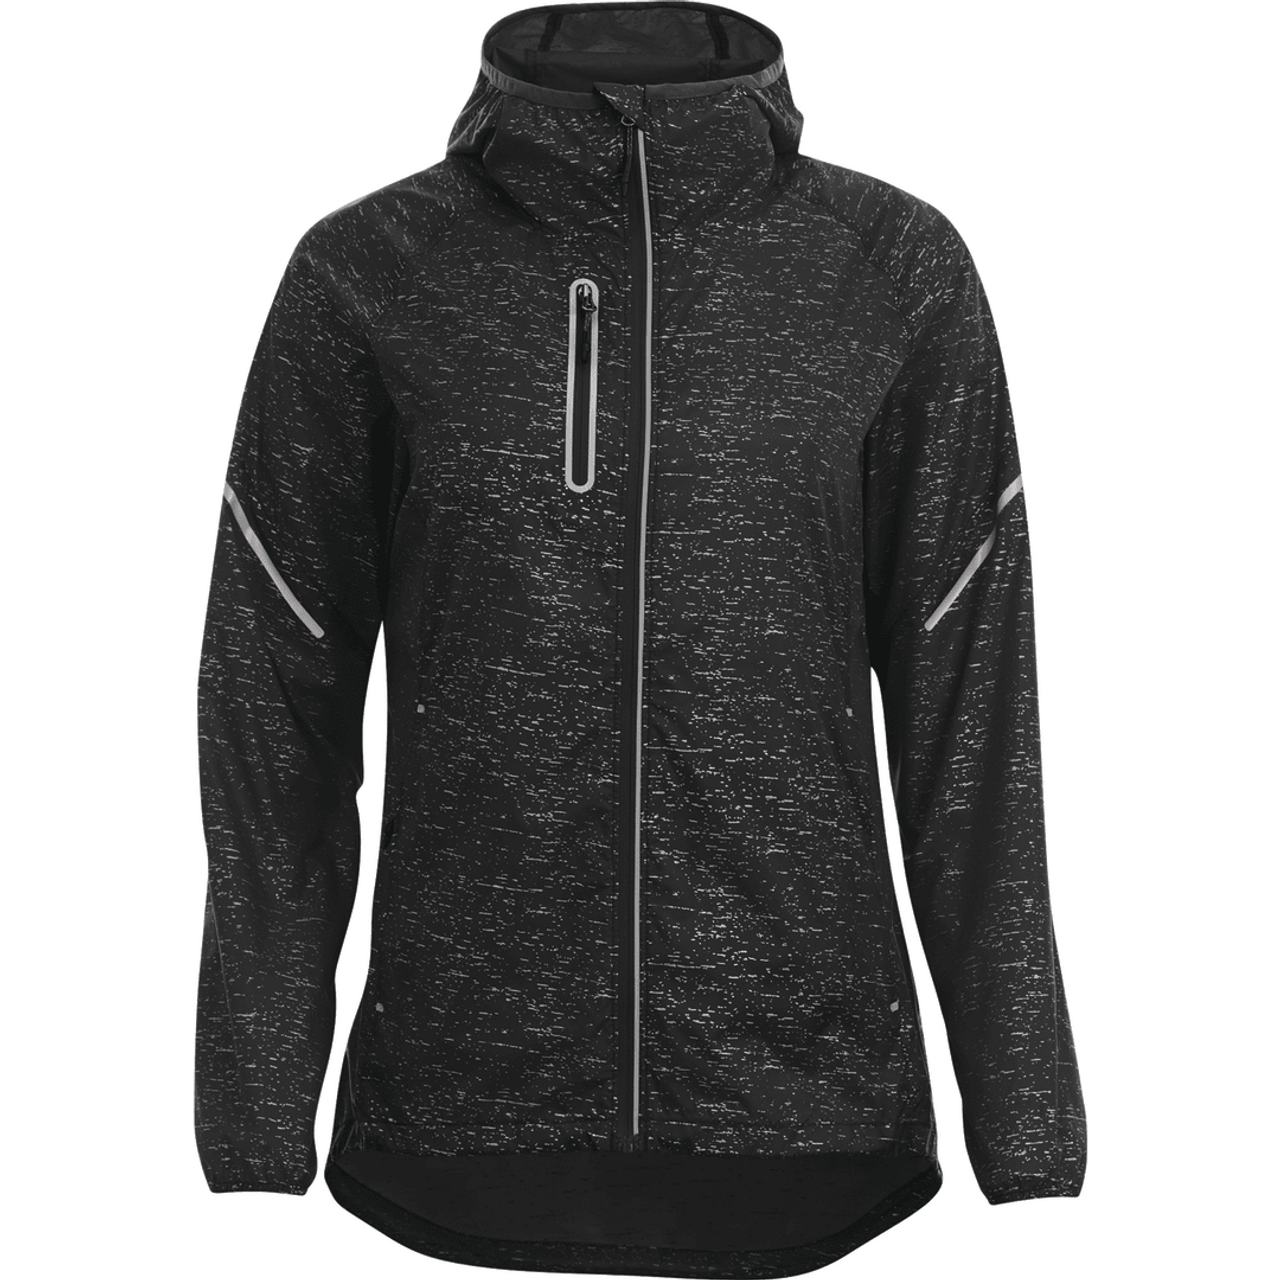 Embroidered Womens SIGNAL Packable Jacket